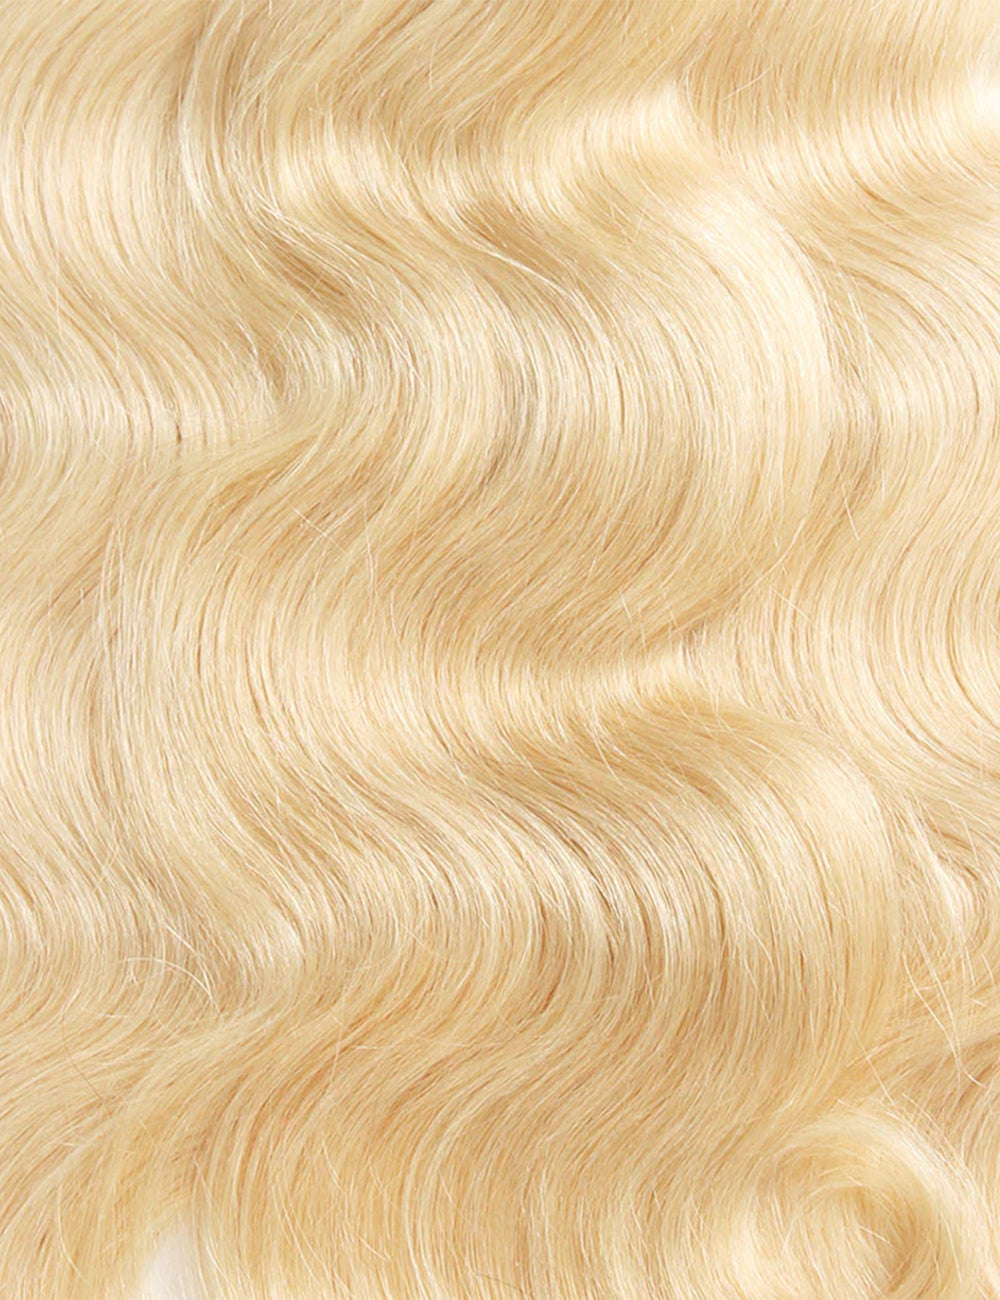 Full Lace Human Hair Wigs 613 Body Wave Wig Honey Blonde Full Lace Wigs HD Transparent 360 Full Lace Wigs